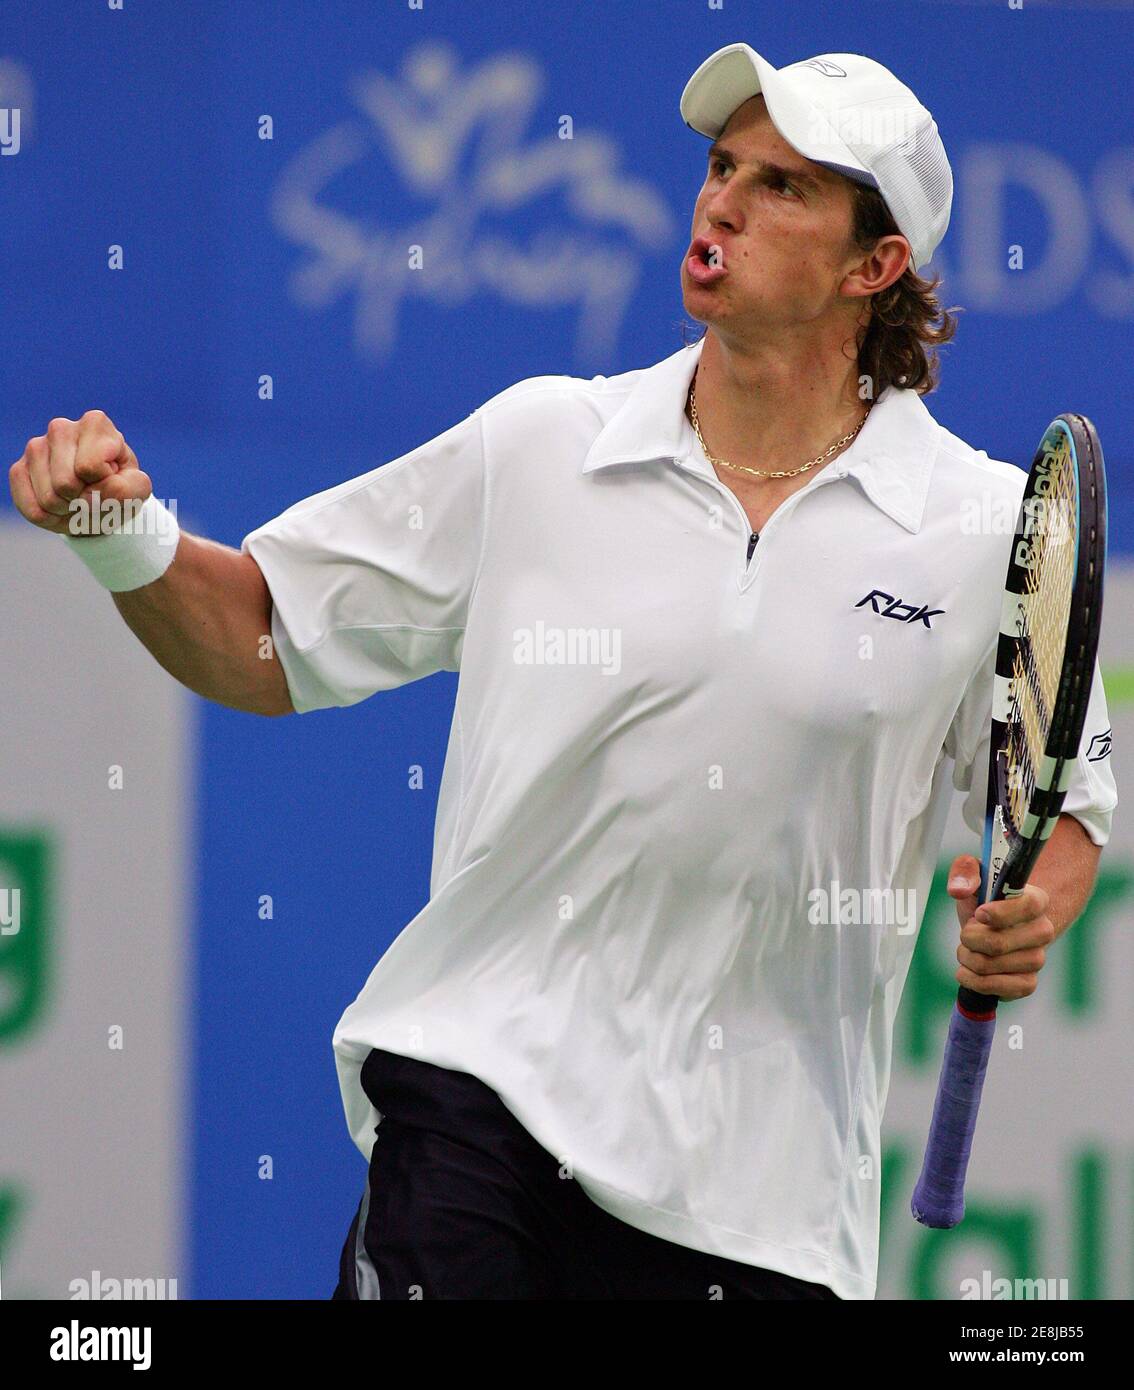 Russia's Igor Andreev urges himself on during his semi-final match against Andreas Seppi of Italy at the Sydney International tennis tournament January 13, 2006. Andreev beat Seppi 6-2 2-6 6-2. REUTERS/Will Burgess Stock Photo